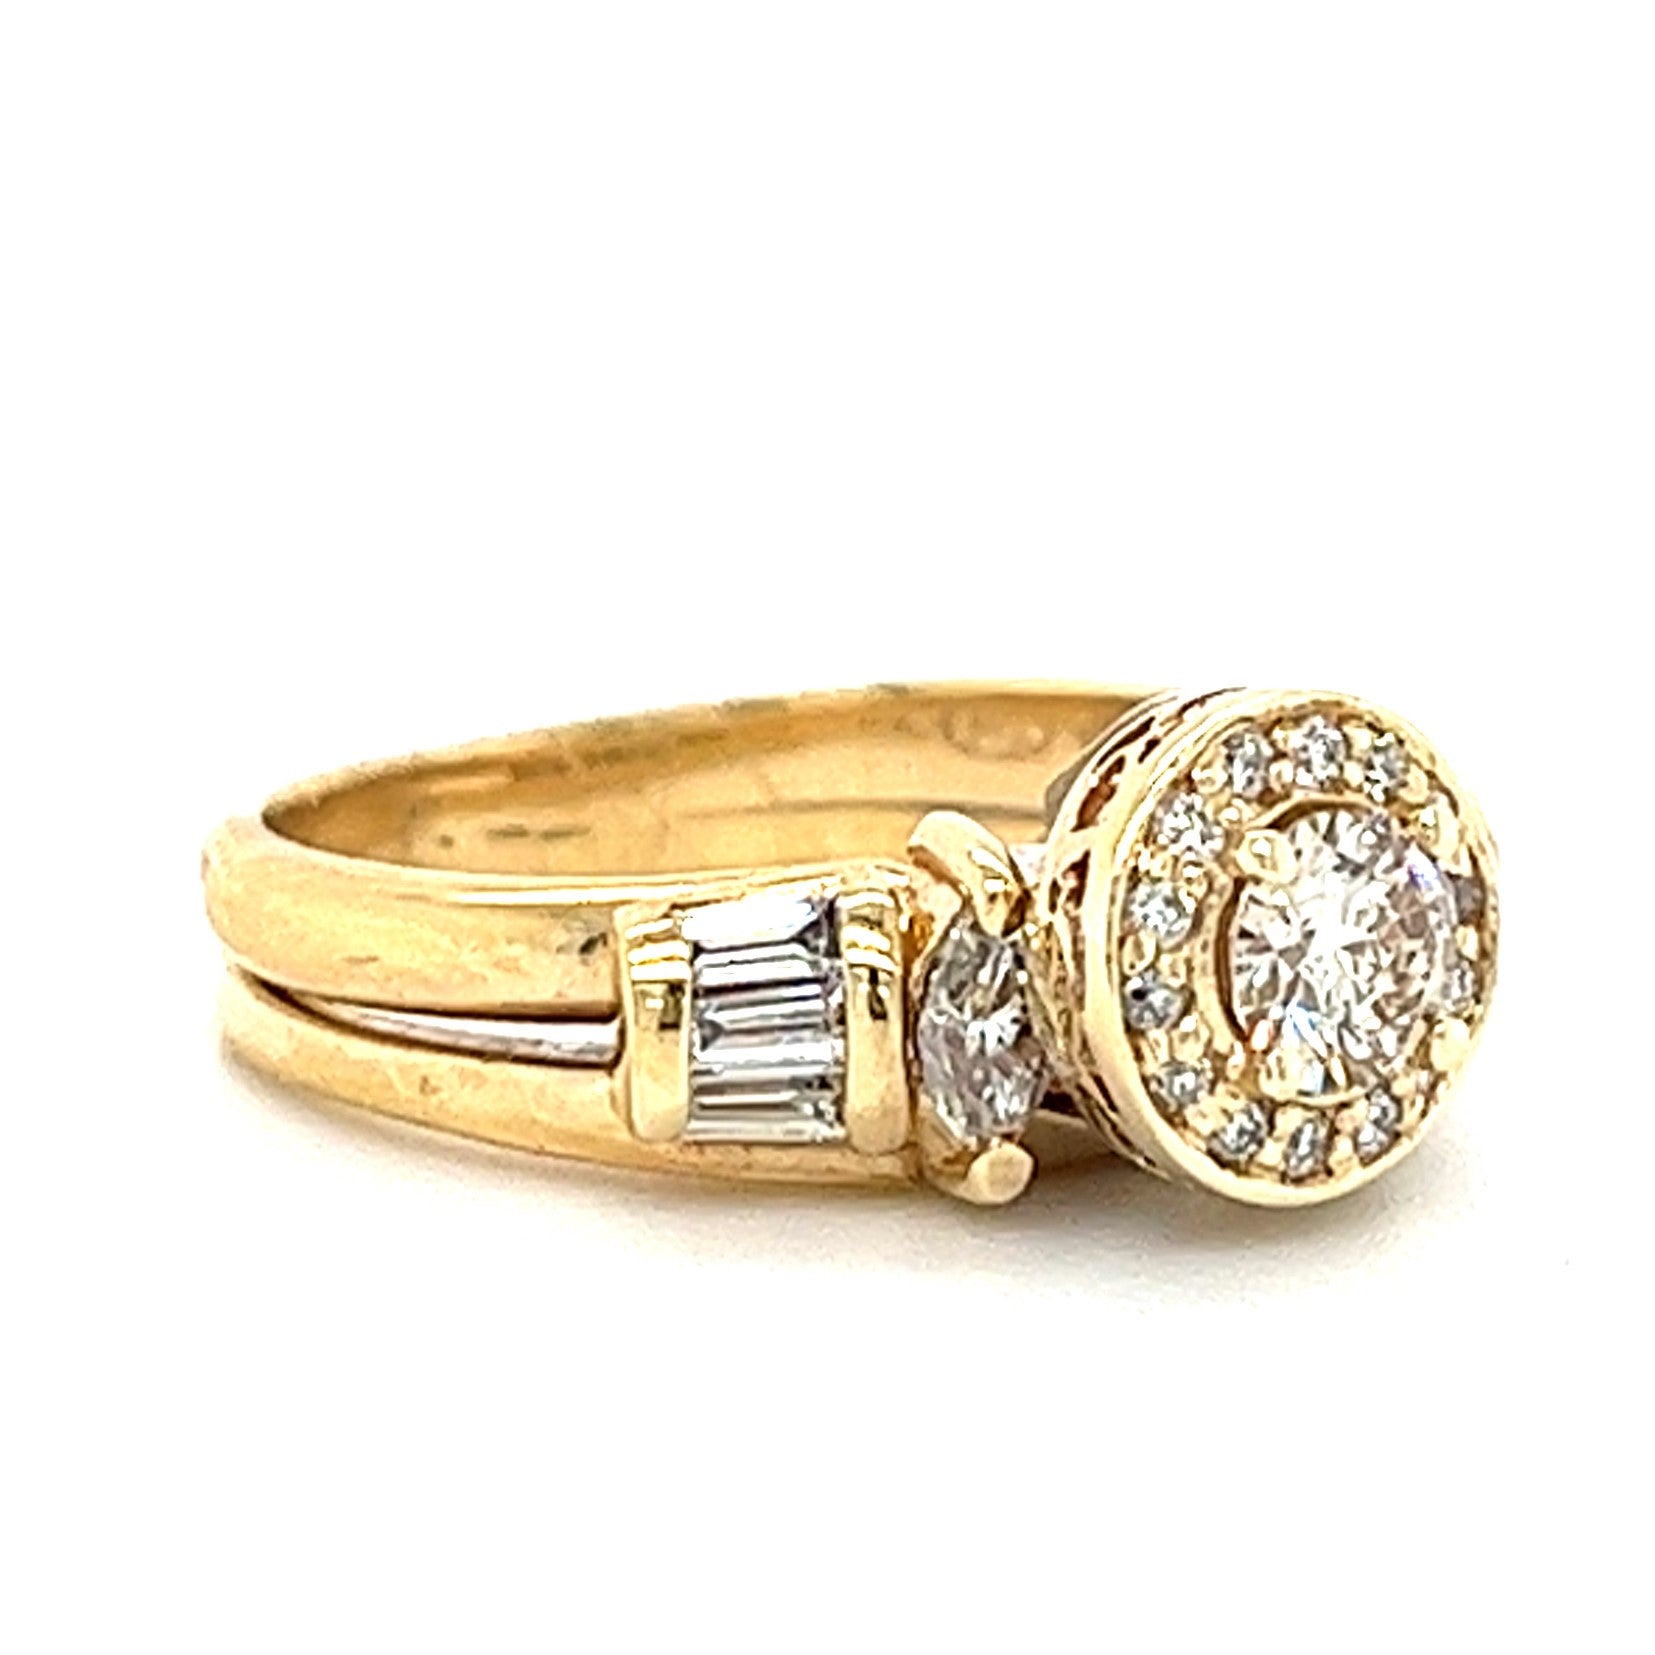 14KT YELLOW GOLD WITH DIAMONDS LADIES ENGAGEMENT RING